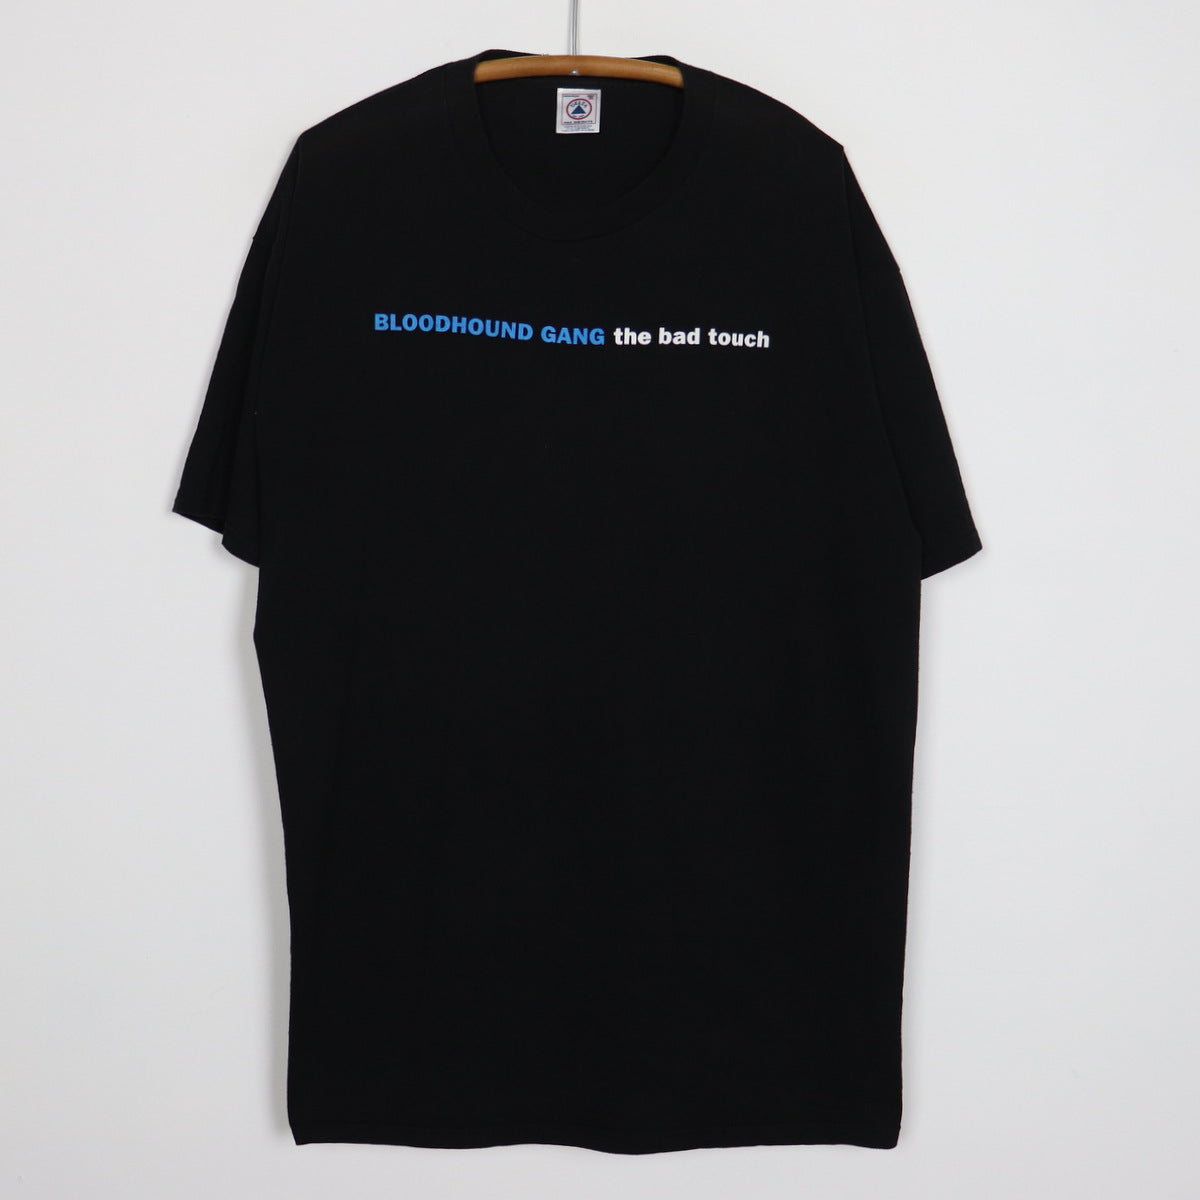 1999 Bloodhound Gang The Bad Touch Shirt